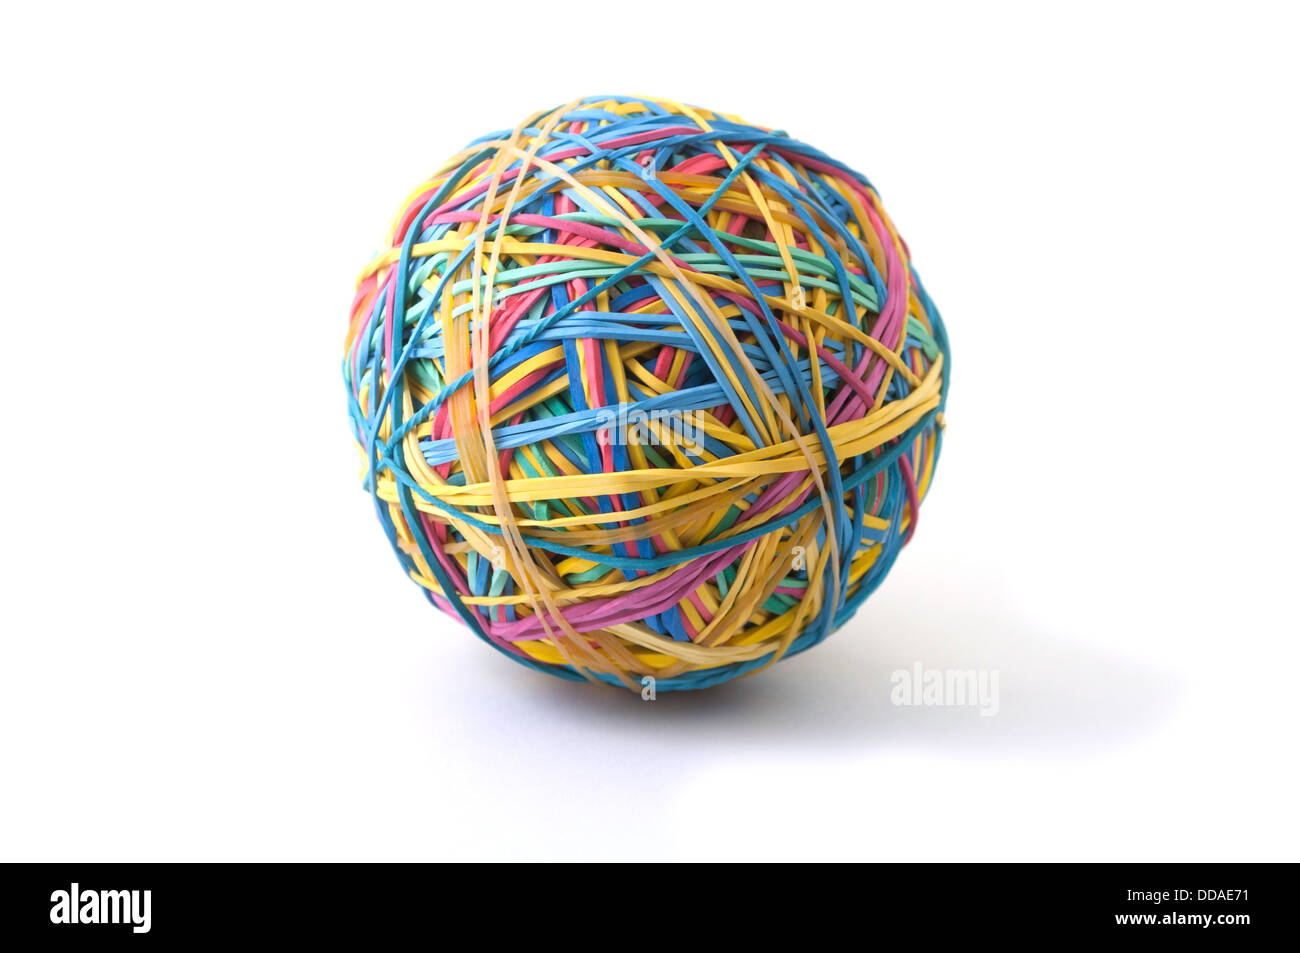 A ball made of rubber bands isolated on white Stock Photo